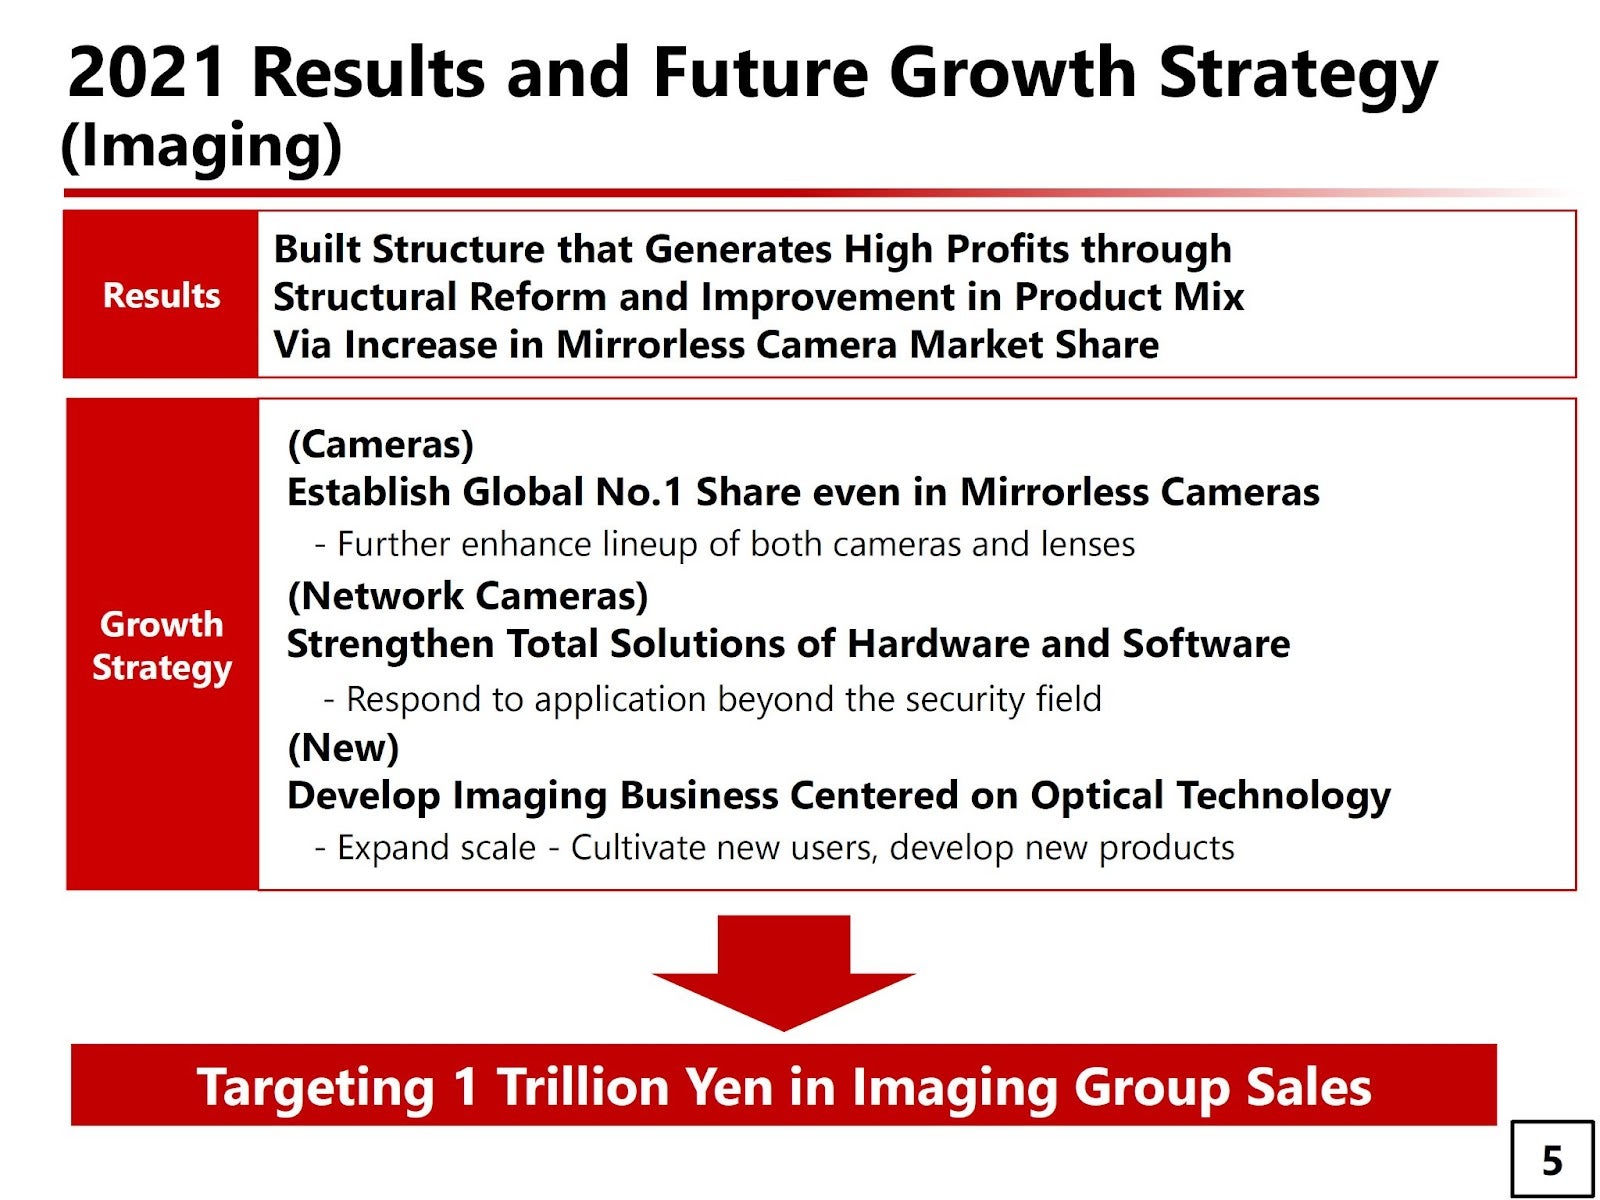 A chart showing Canon's sales and growth numbers looking back from 2022.